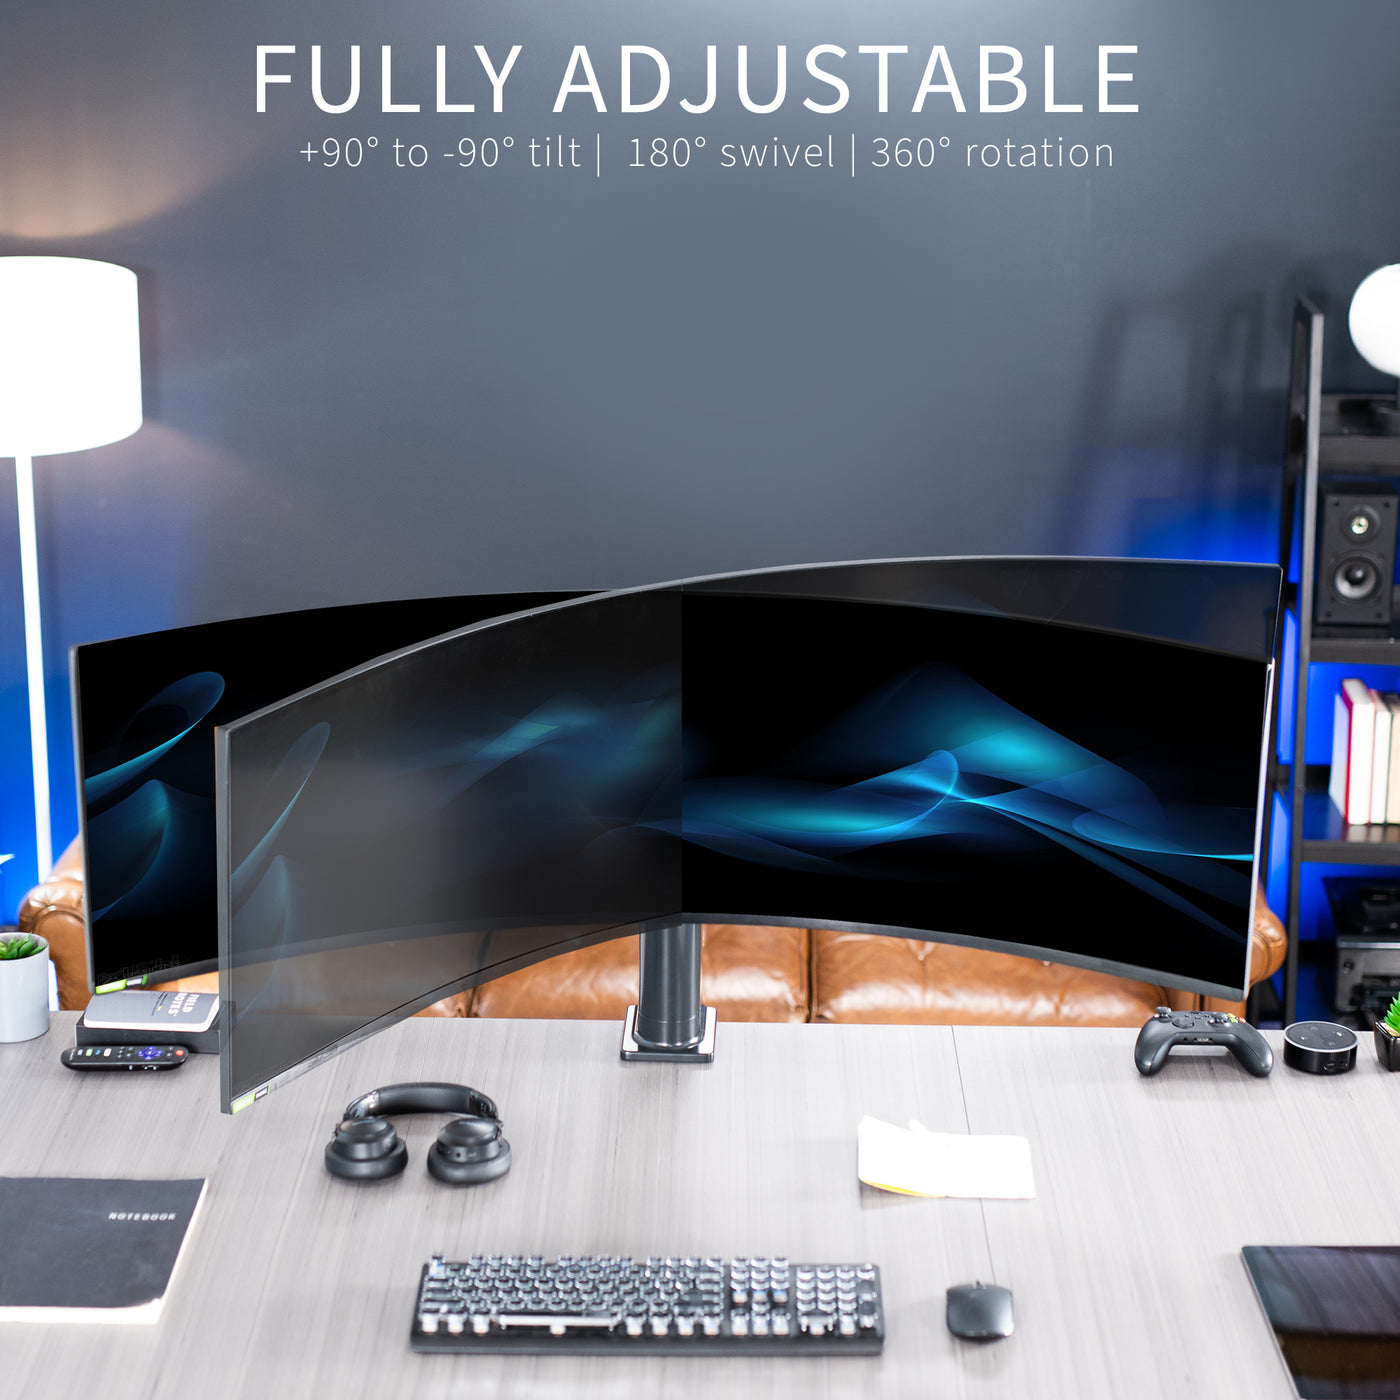 Single monitor ultrawide desk mount with electric height adjustment and full articulation.